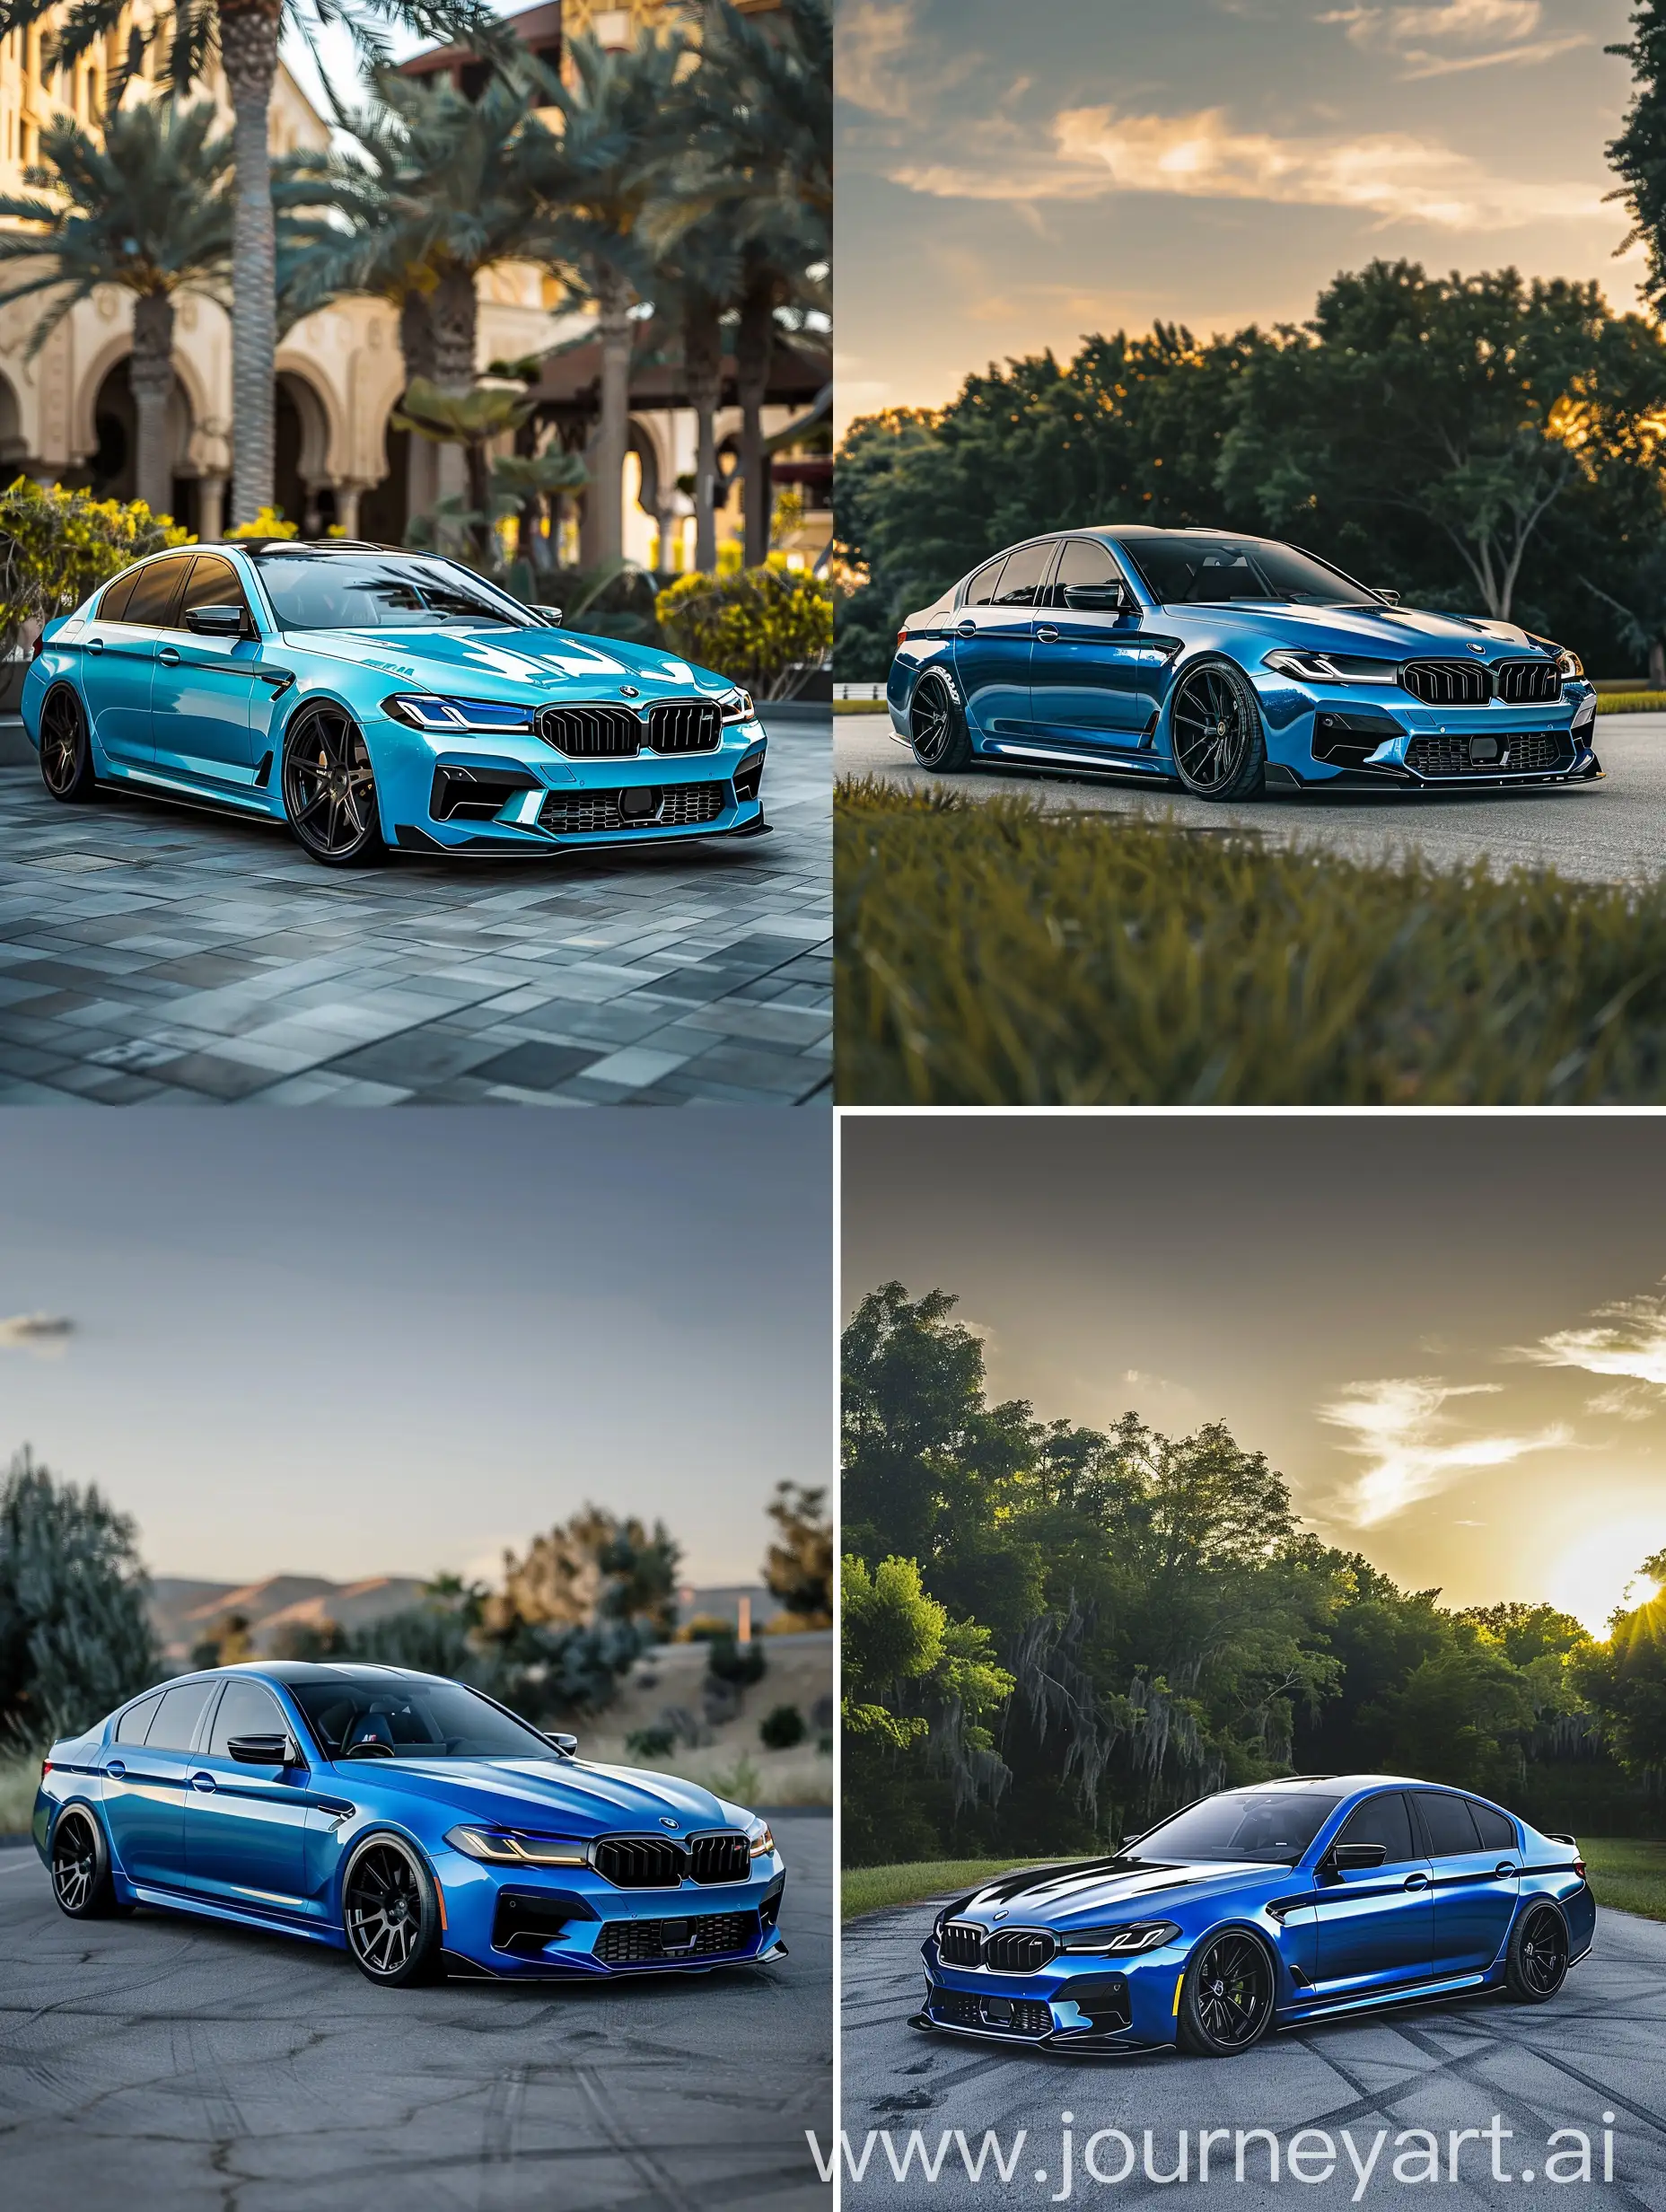 Customized-BMW-M5-2022-with-Unique-Blue-and-Black-Livery-in-Summer-Setting